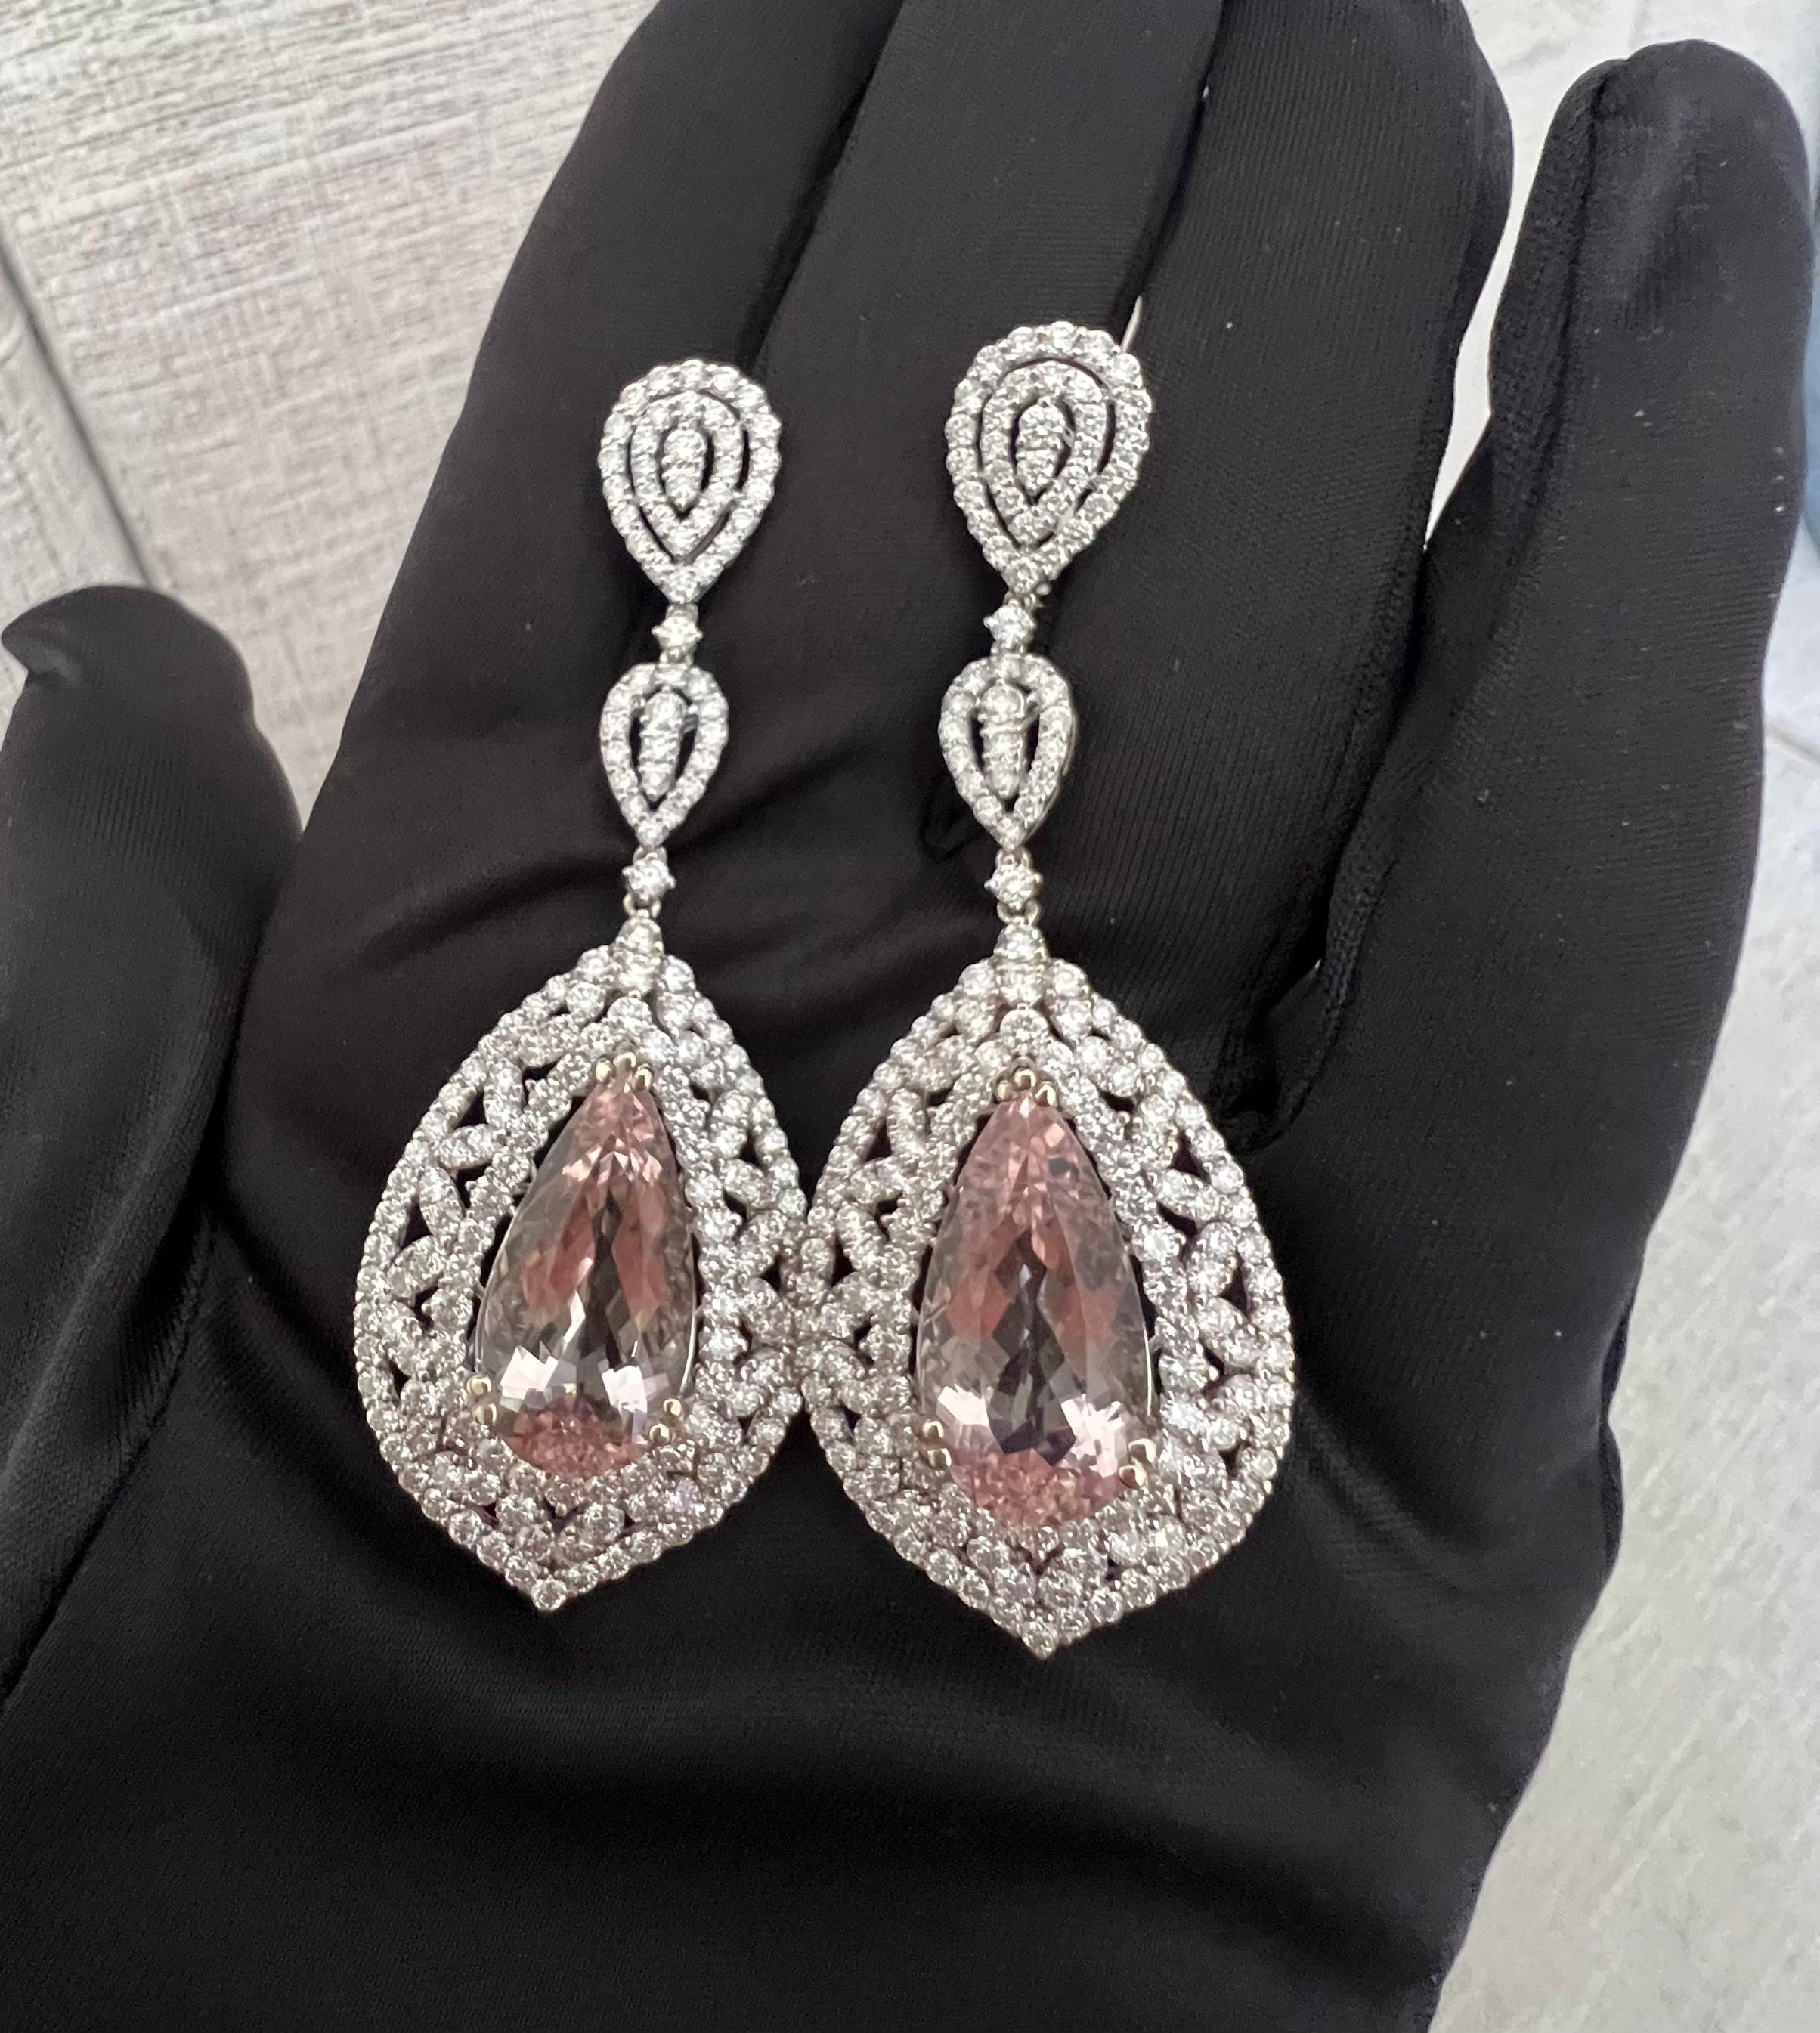 Exquisite pair of 33.85 carat total weight pear shaped brilliant cut pink morganite and diamond earrings are talon prong set in 18 karat white gold above a mesmerizing three layer pear shaped diamond halo of round brilliant diamonds set in between a